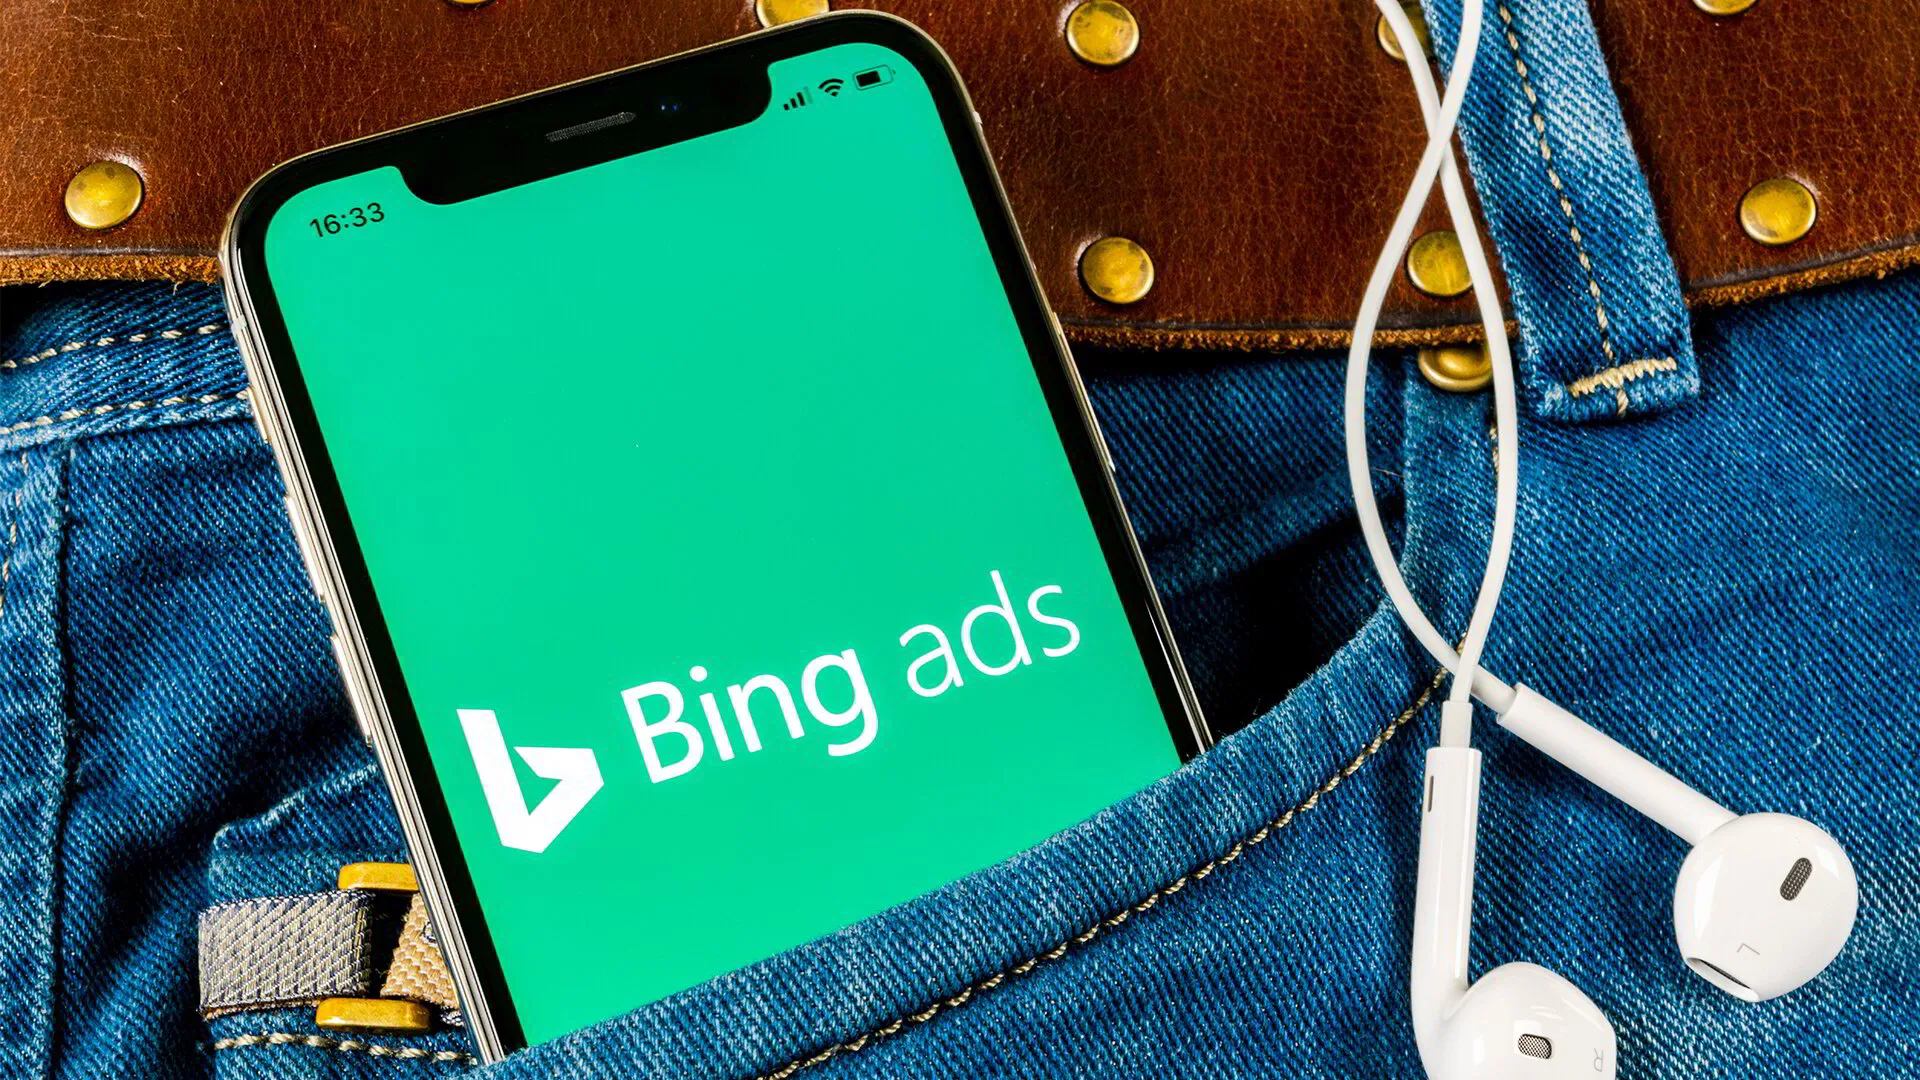 Mobile phone with Bing Ads on the screen in a jeans pocket